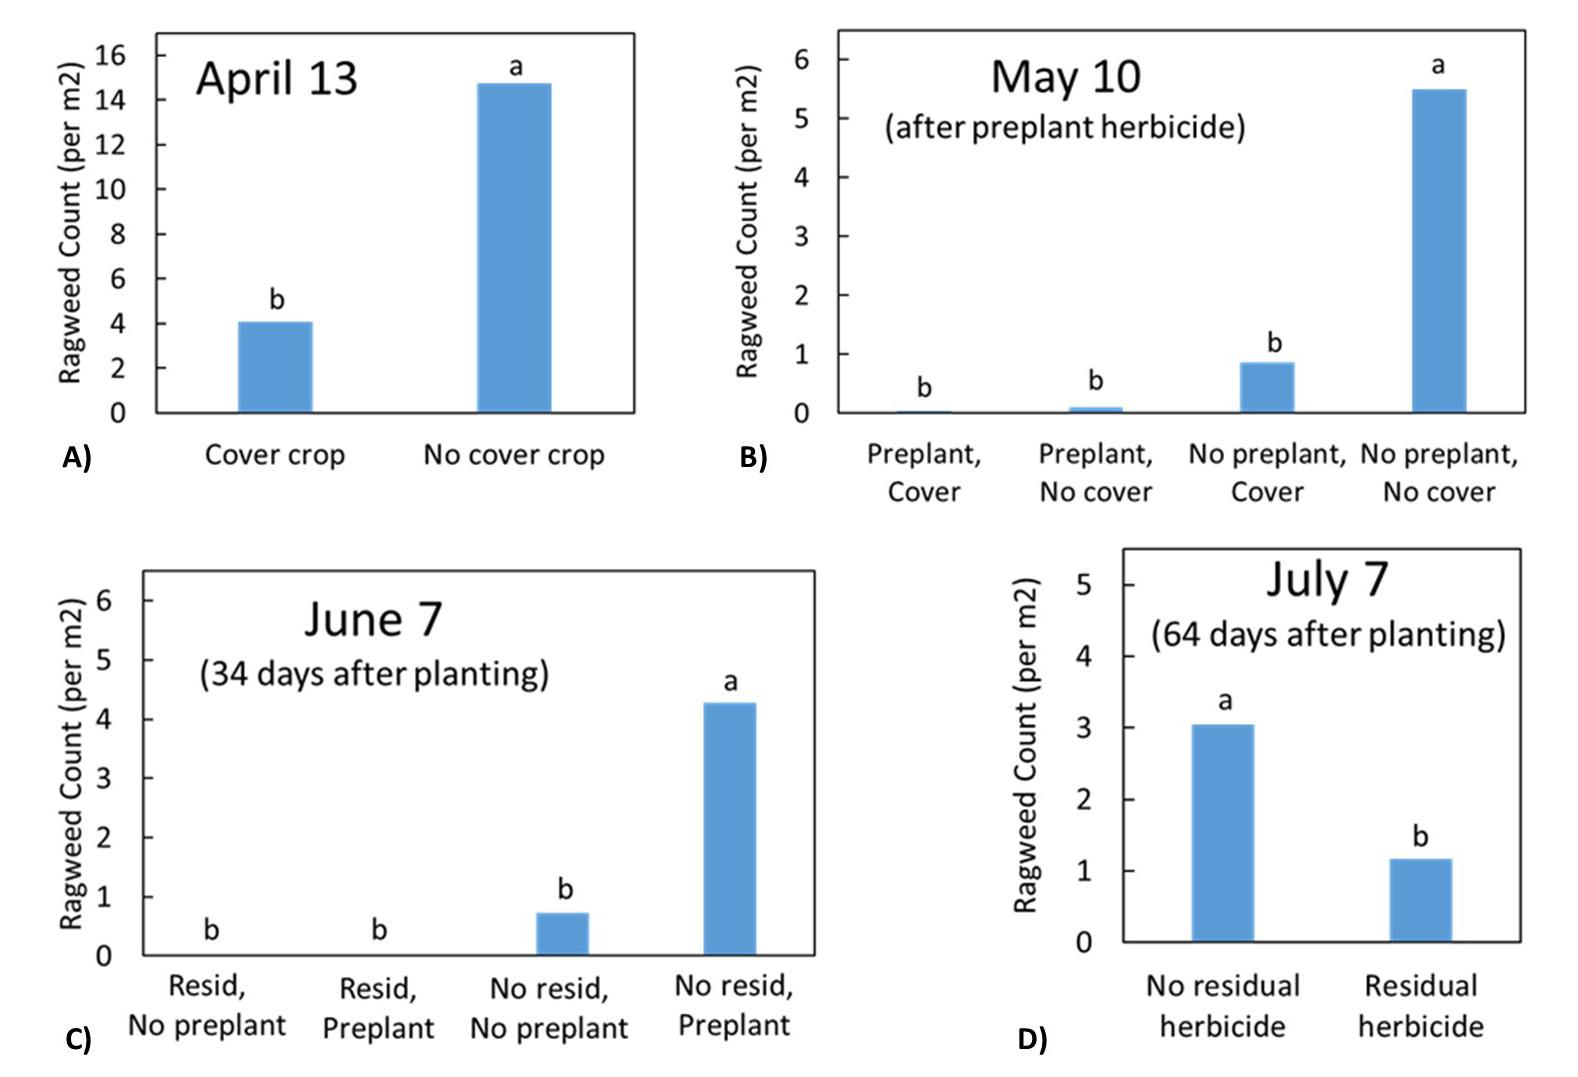 Figure 2. Ragweed prevalence April 13 (a), May 10 (b), June 7 (c), and July 7 (d). Different letters above bars indicate statistically significant differences (p < 0.1) for data.